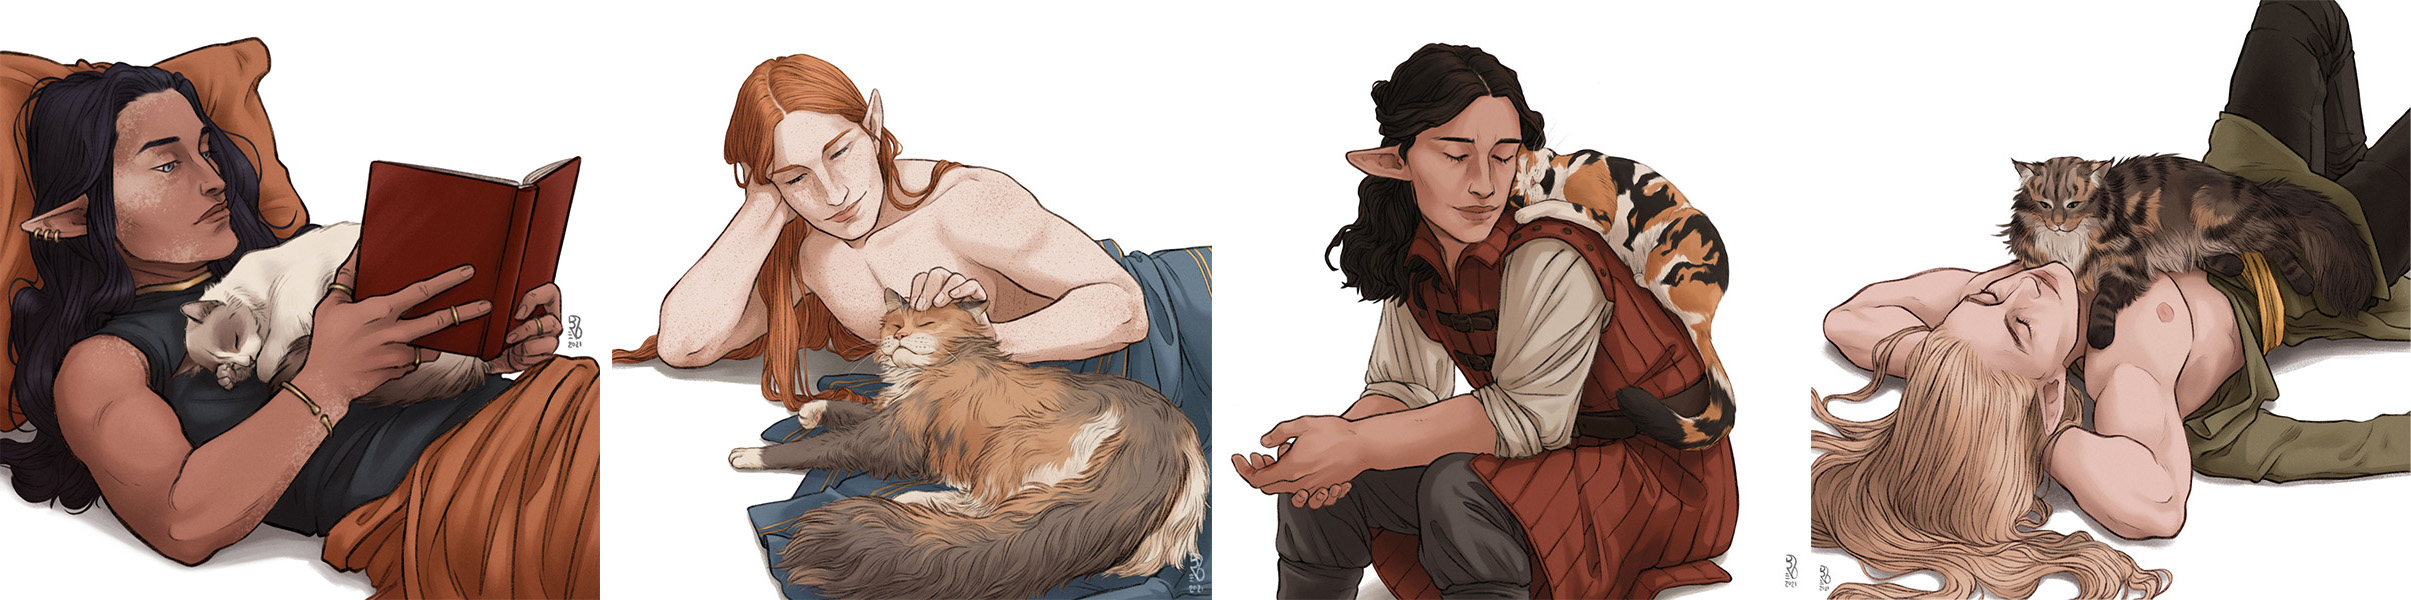 From left to right: Caranthir with a Ragdoll cat; Maedhros with Maine Coon; Maglor with a Calico Cat; Celegorm with a Norwegian Forest Cat by Dorothea/Busymagpie